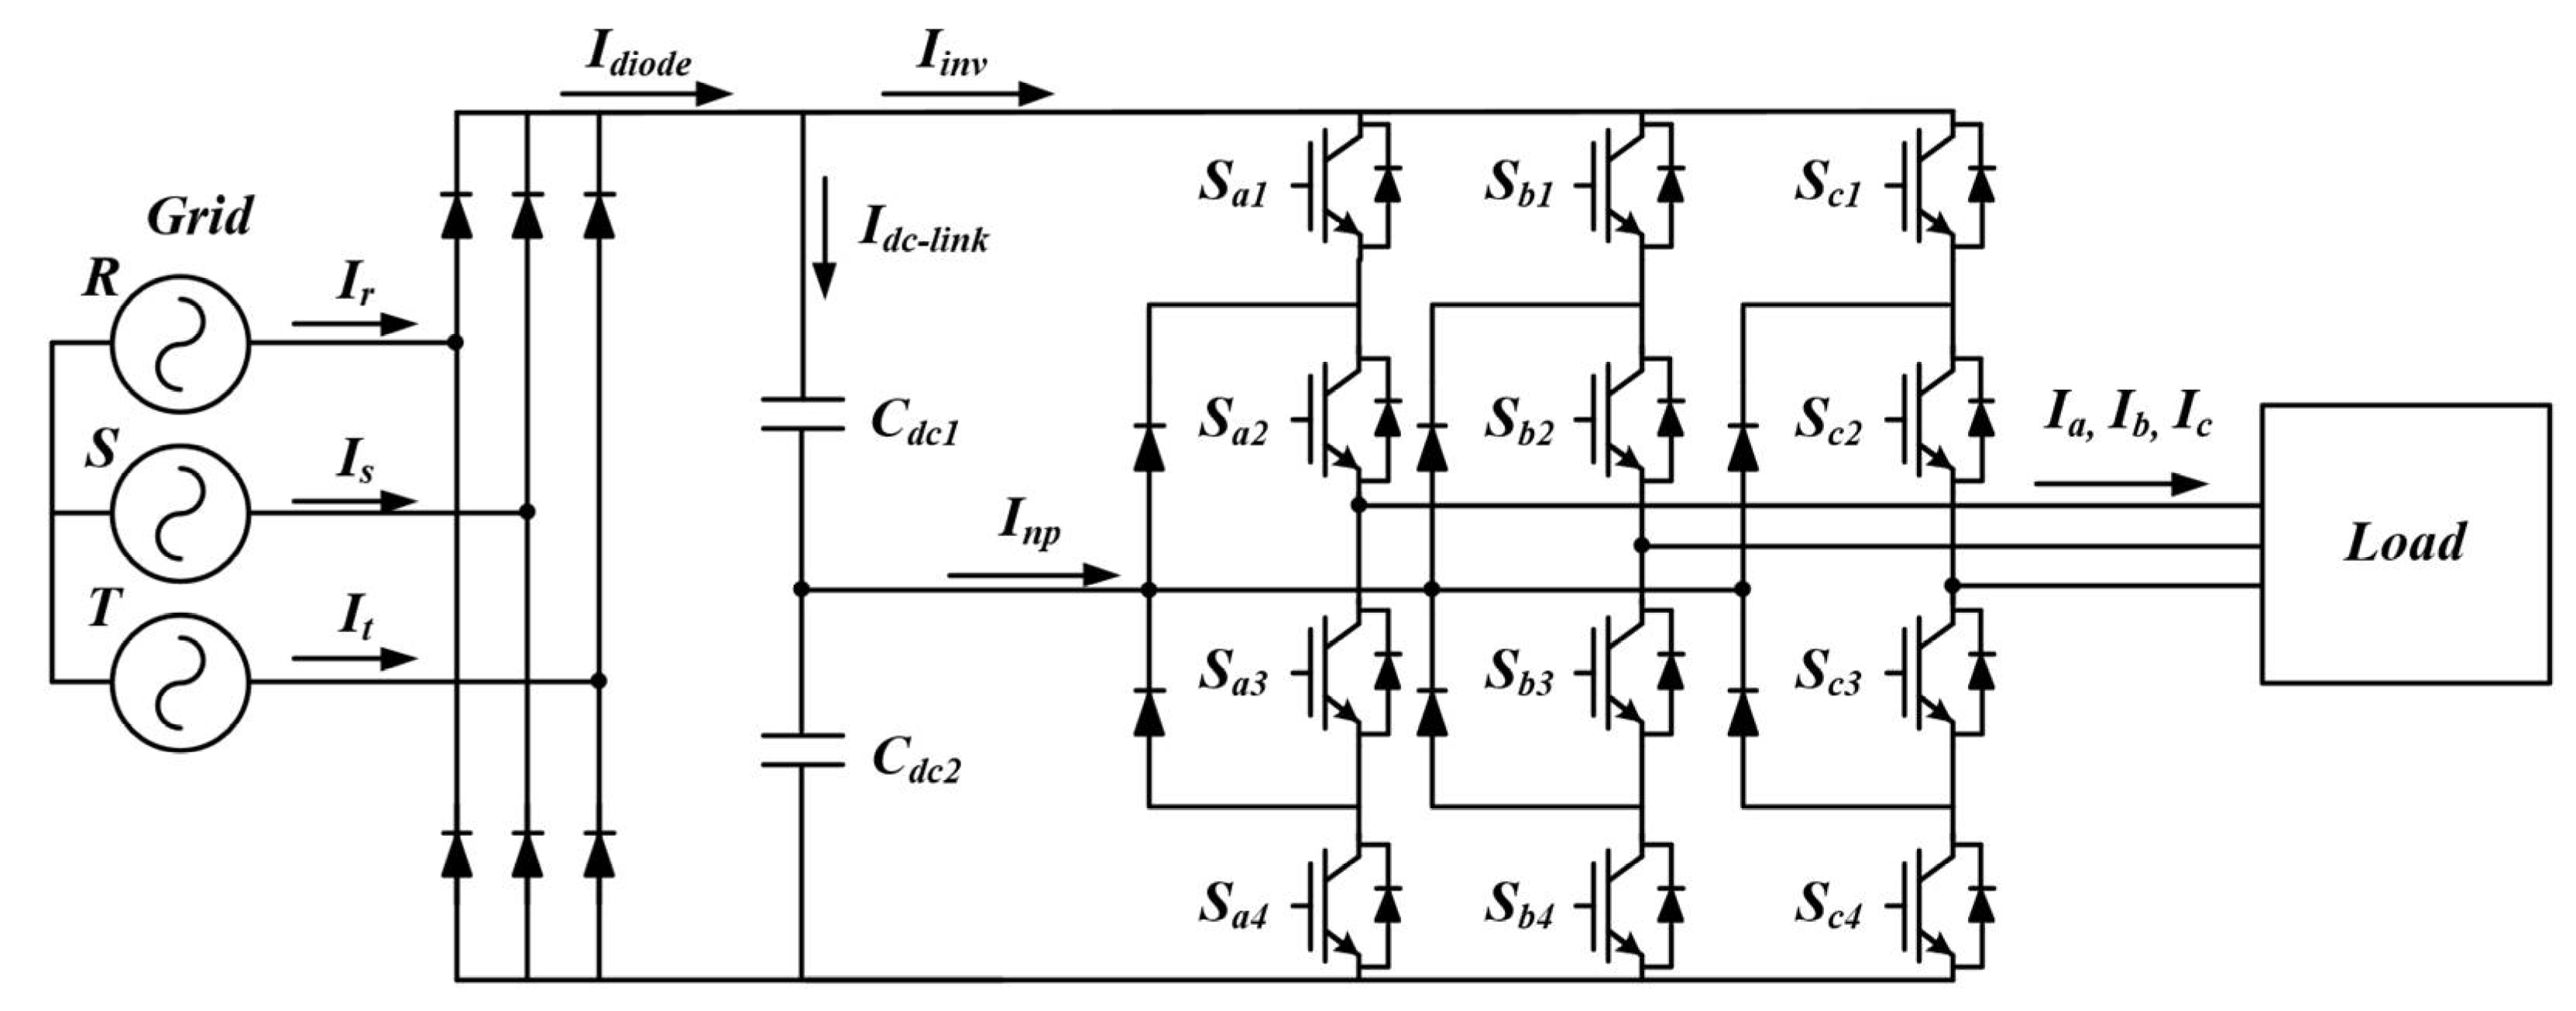 Energies | Free Full-Text | Design and Control of Small DC-Link Capacitor-Based  Three-Level Inverter with Neutral-Point Voltage Balancing